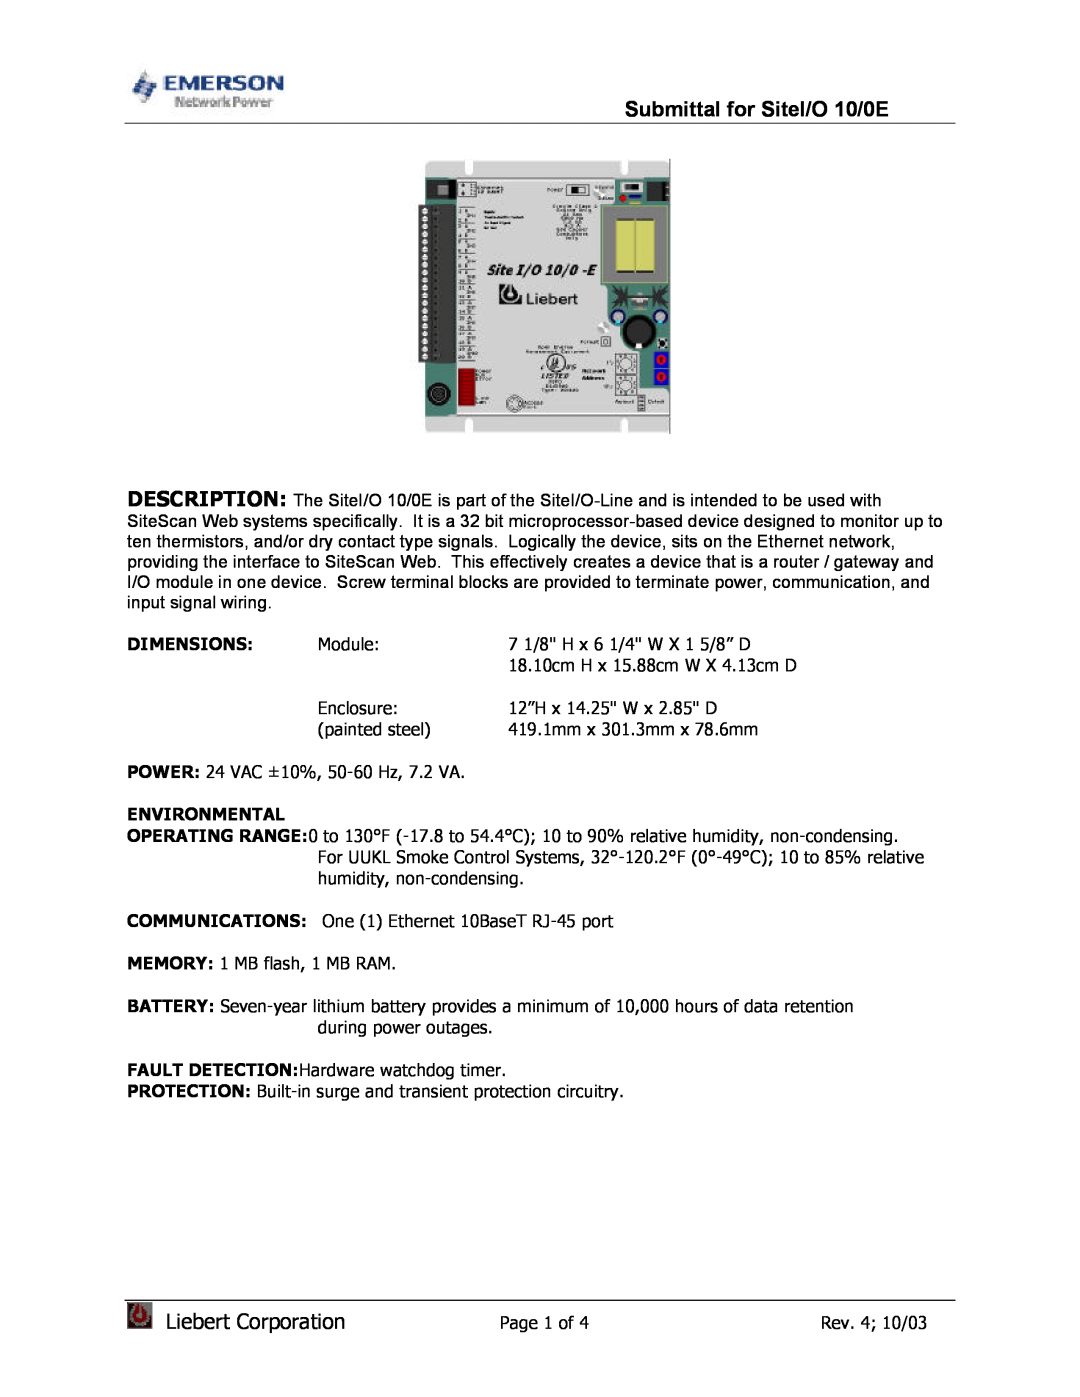 Emerson Network Power dimensions Submittal for SiteI/O 10/0E, Liebert Corporation, Dimensions, Environmental 